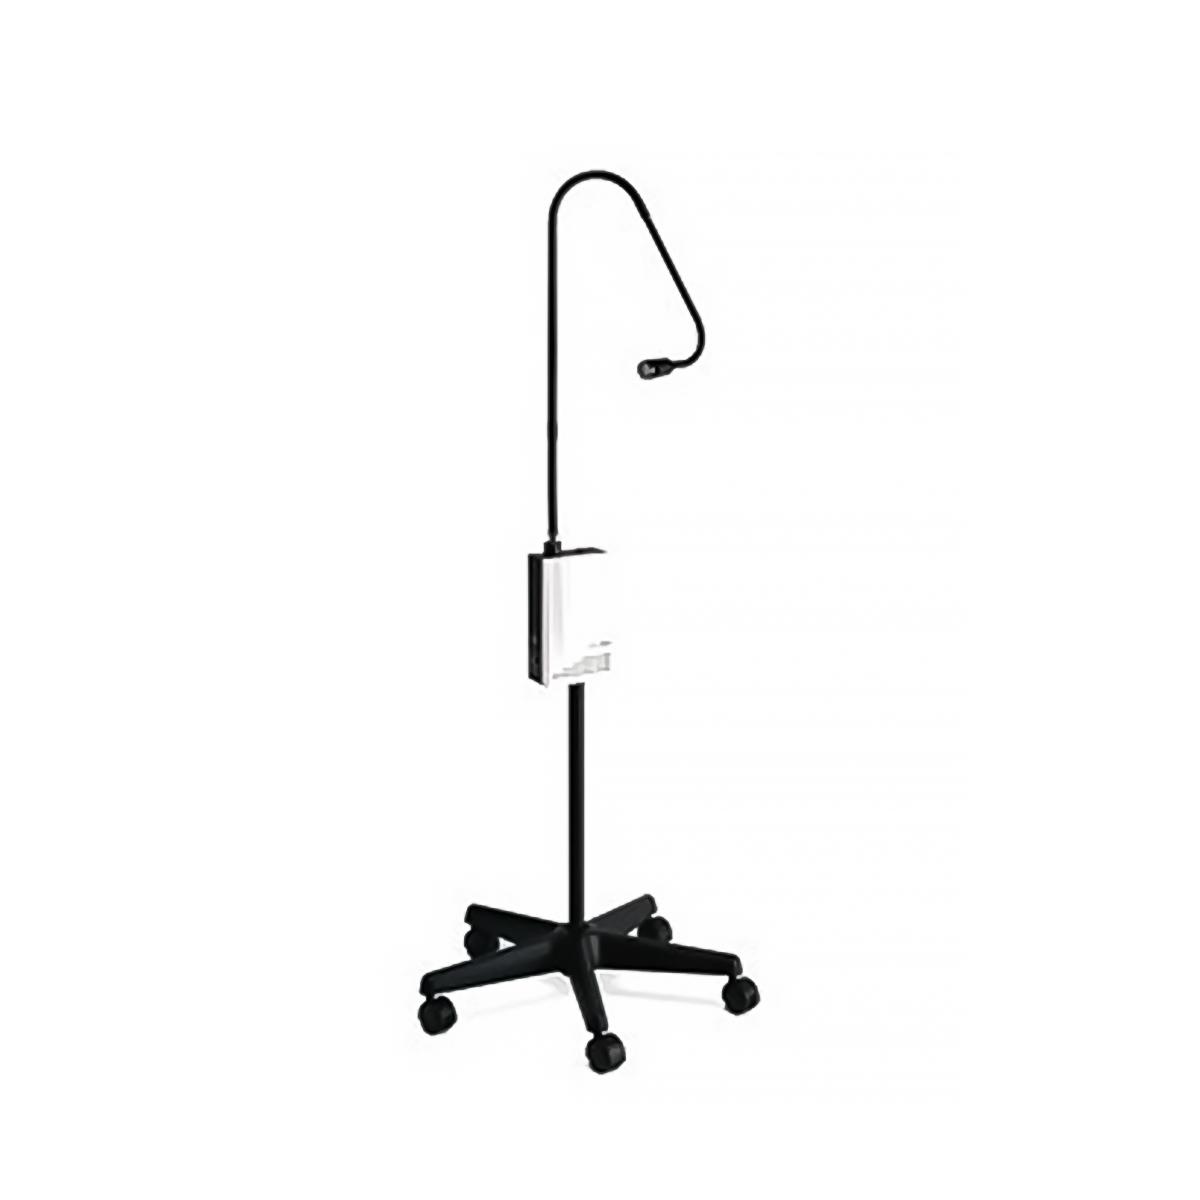 The free-standing Welch Allyn Exam Light III. The unit and stand are black. The stand has 5 caster wheels.